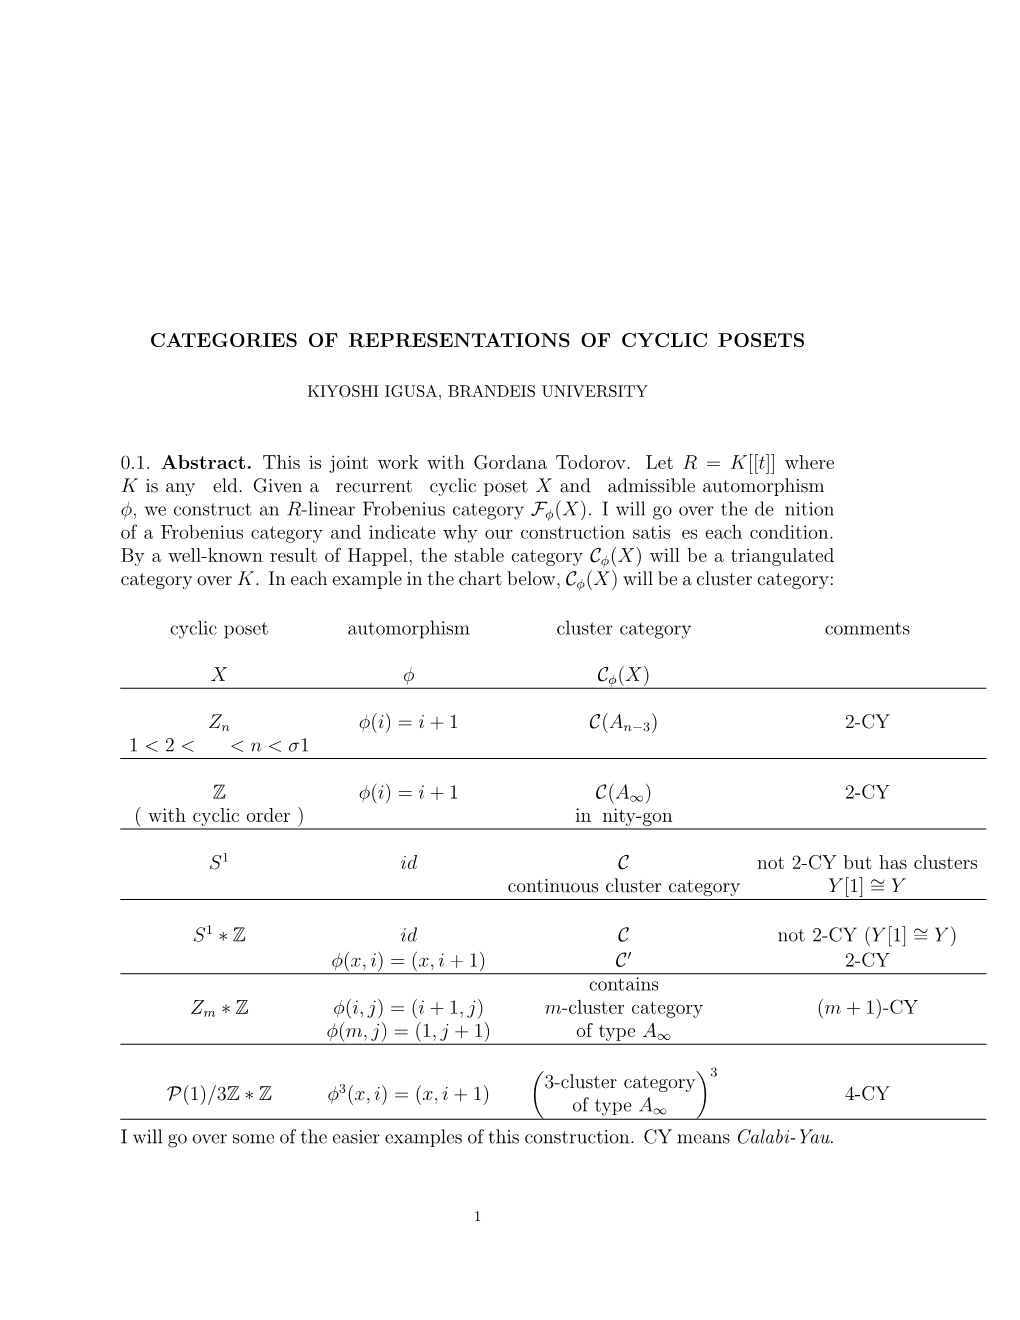 Categories of Representations of Cyclic Posets